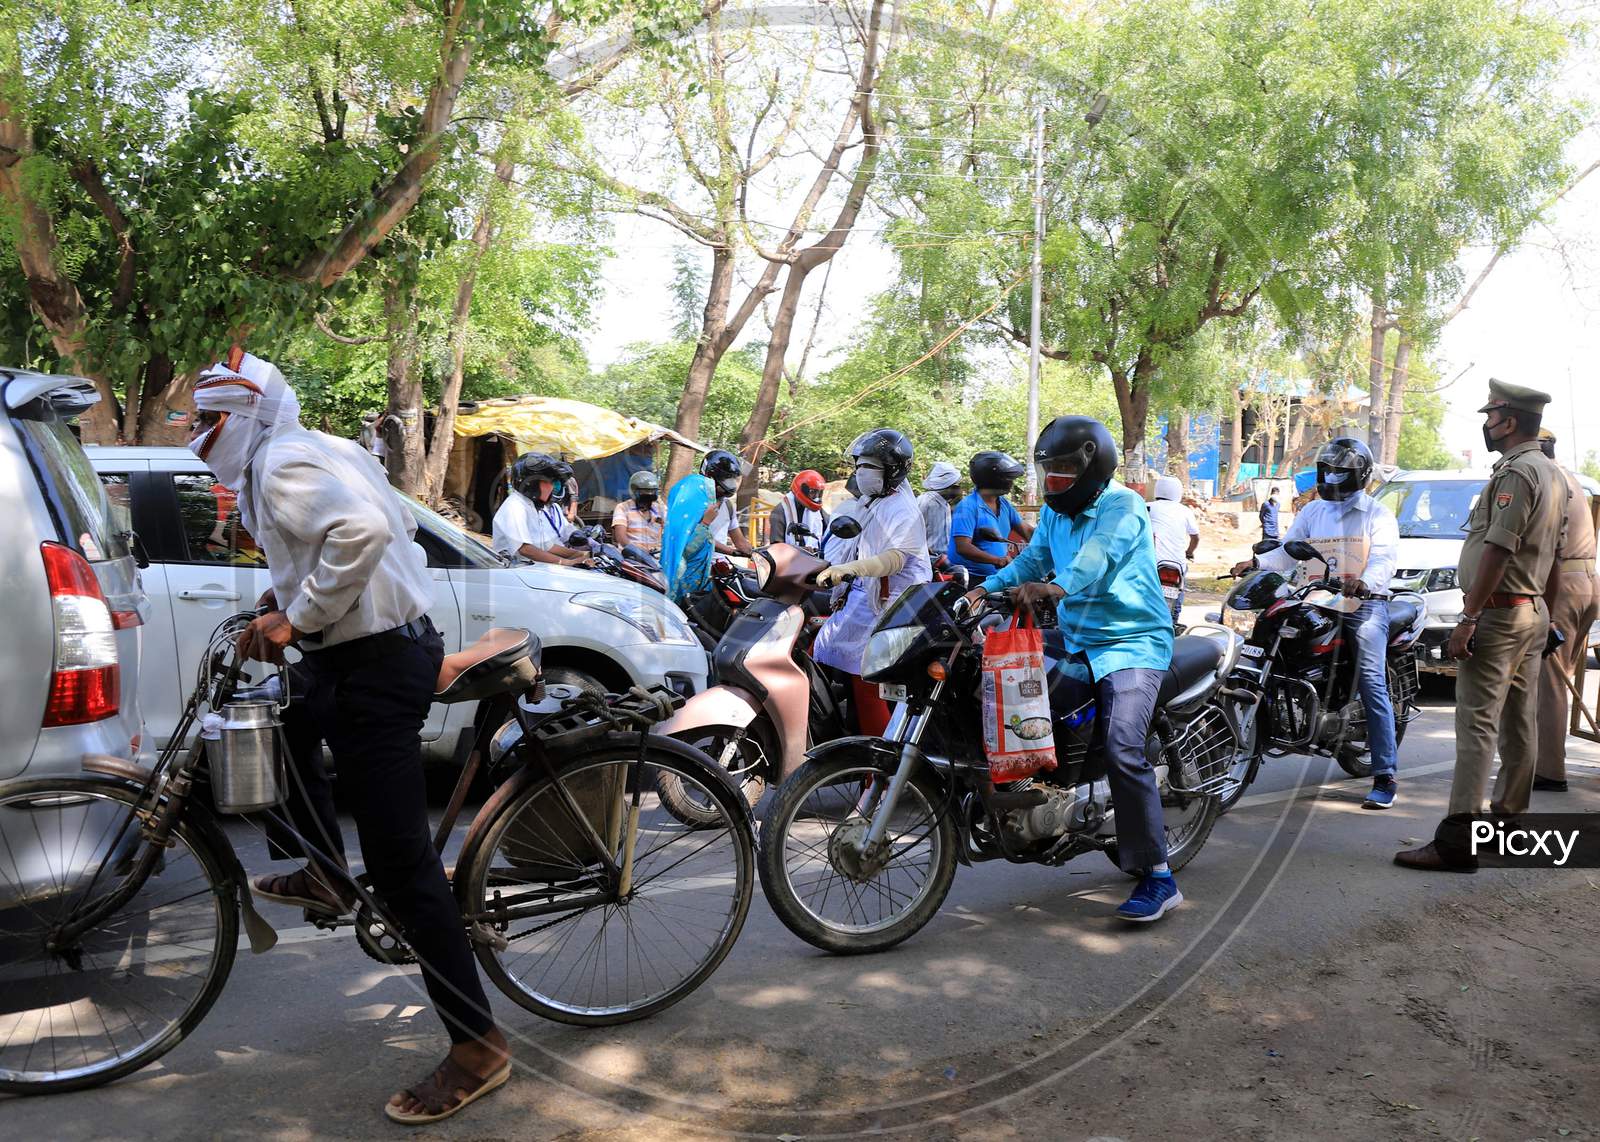 People Drive Through Barricades At City Entrance Points As They Enter The Prayagraj City During Nationwide Lockdown Amidst Coronavirus Or Covid-19 Pandemic  In Prayagraj, May 12, 2020